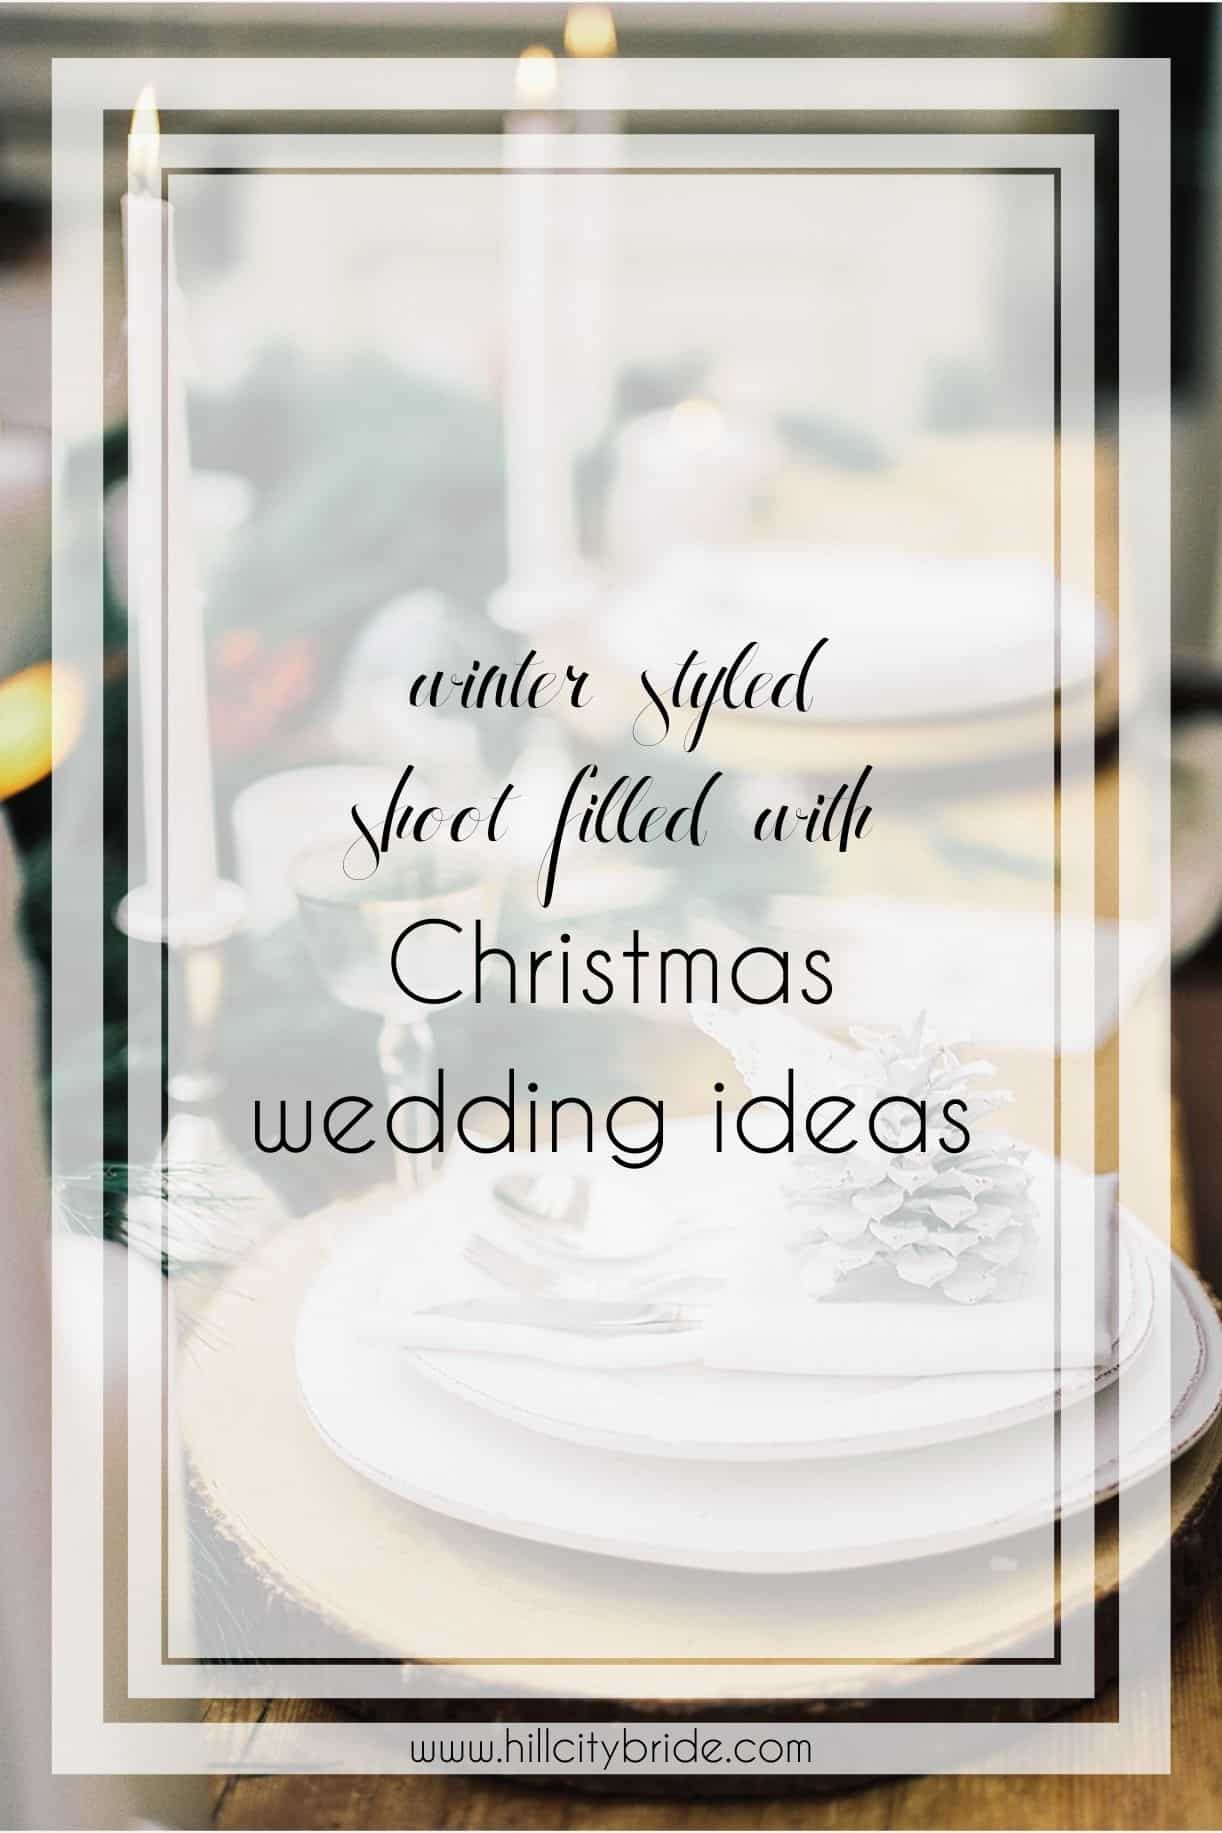 See Amazing Christmas Wedding Ideas in this Winter Styled Shoot